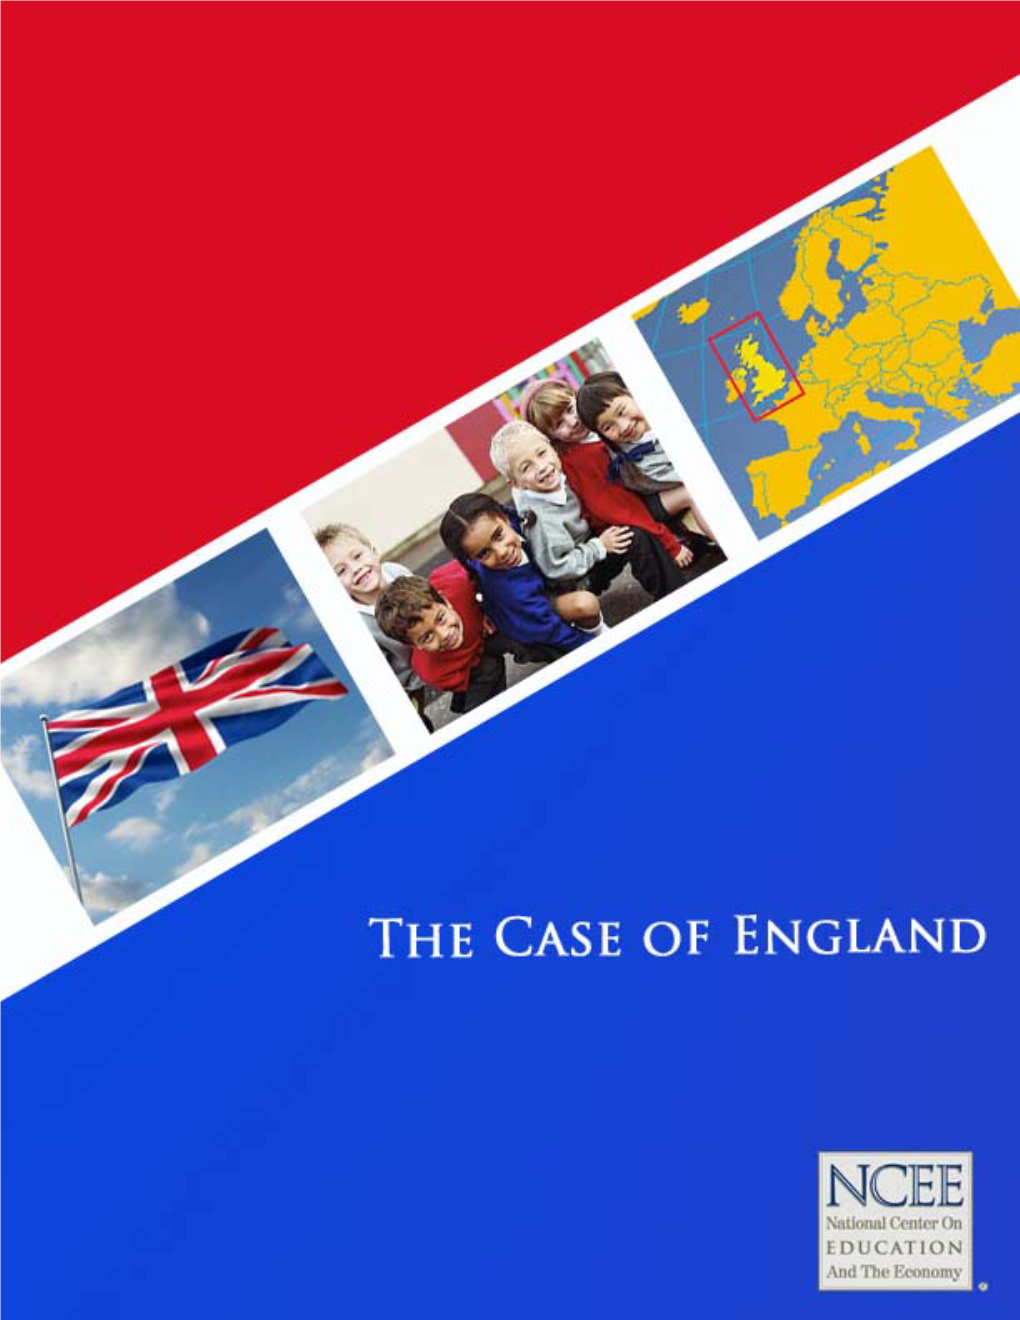 The Case of England